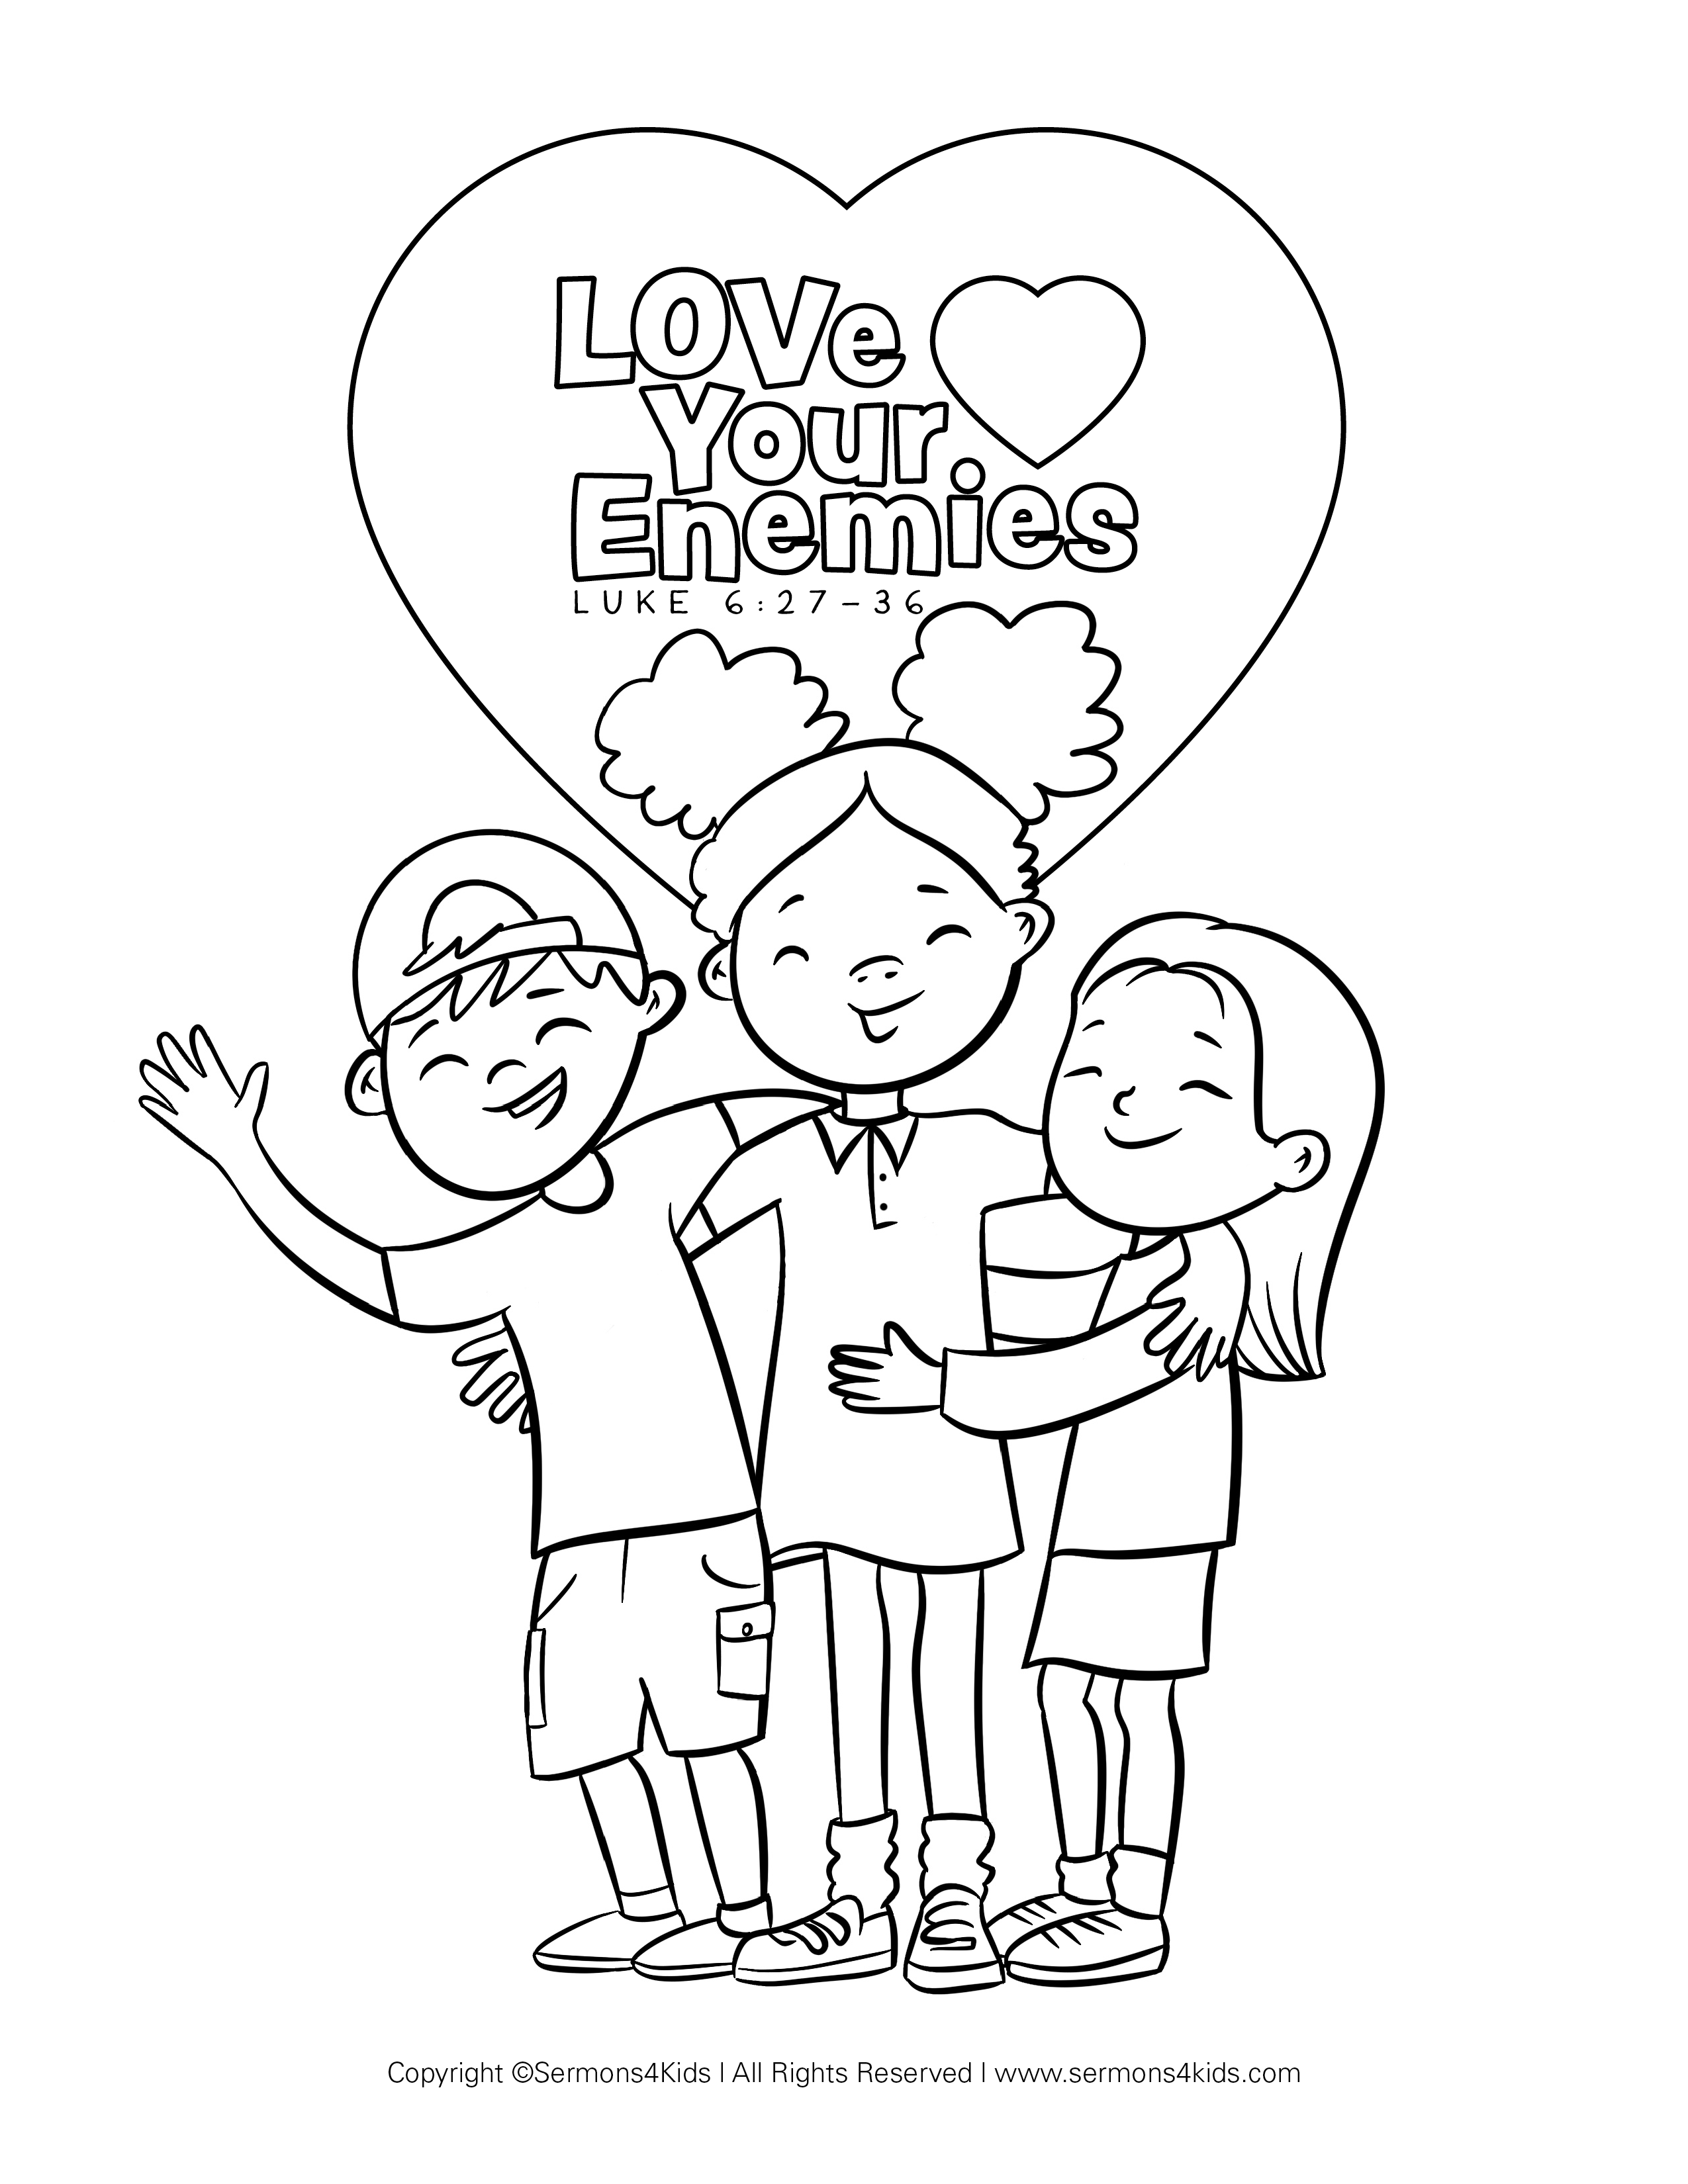 Love-your-enemies-golden-rule-coloring-page